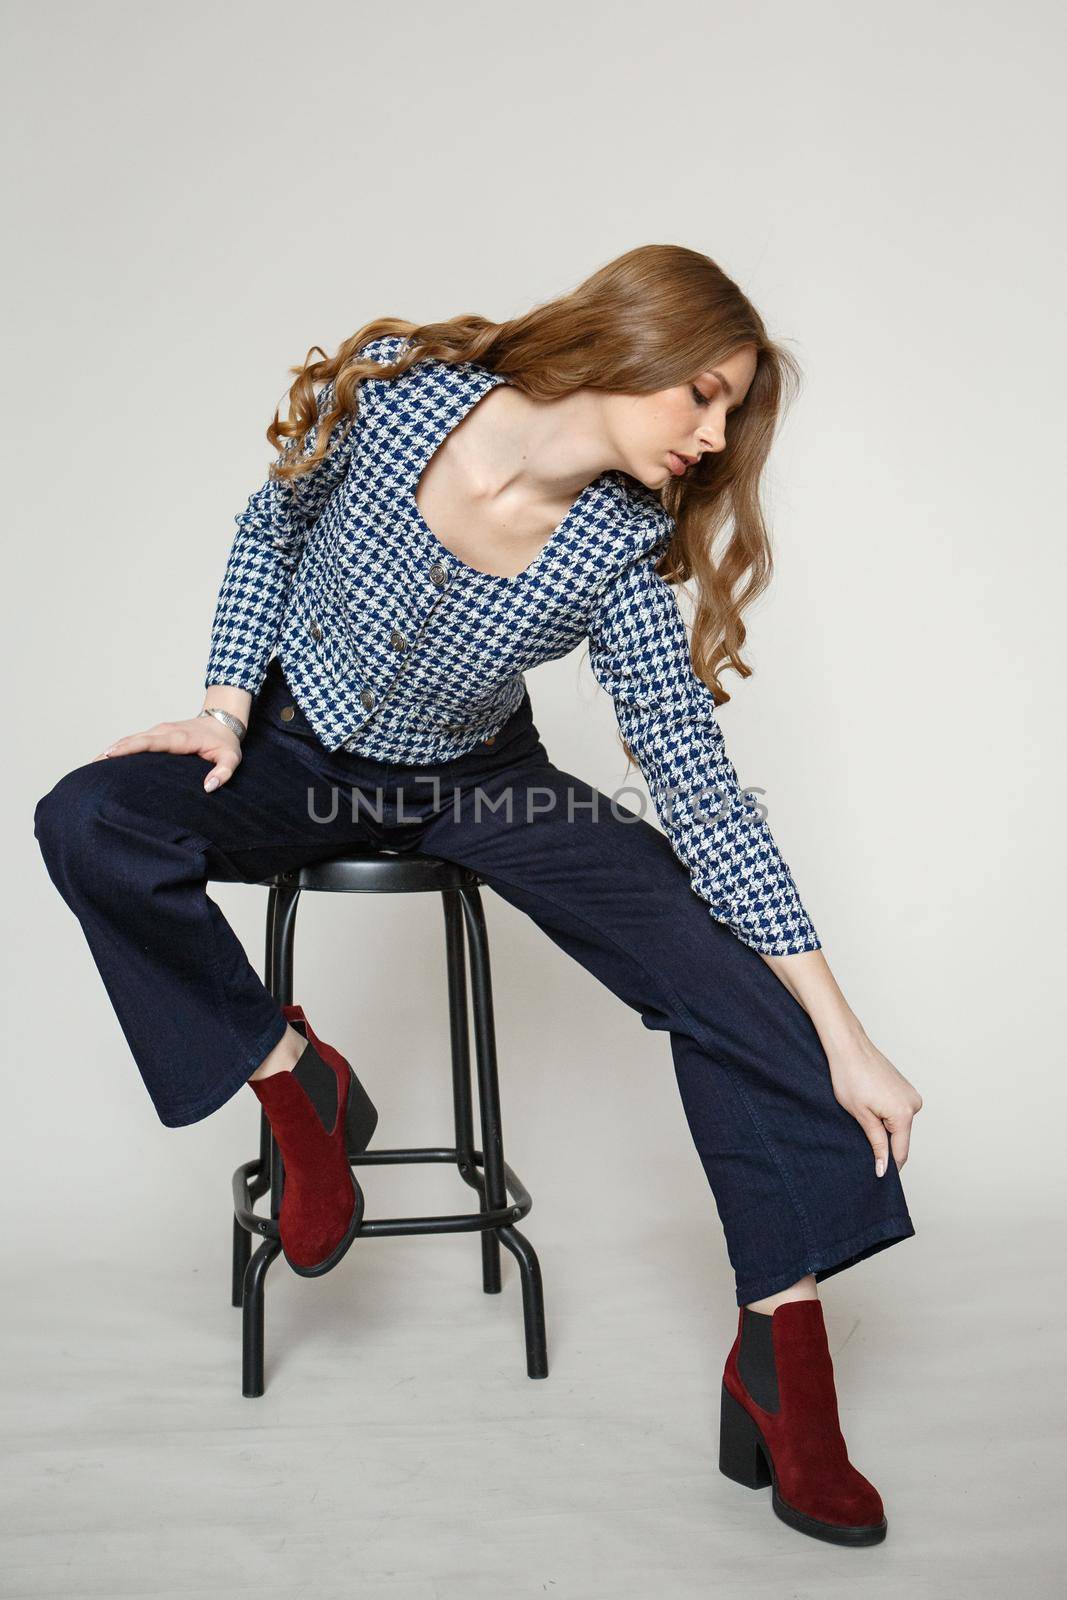 A girl in a denim suit standing on a studio background. The model is sitting on a chair